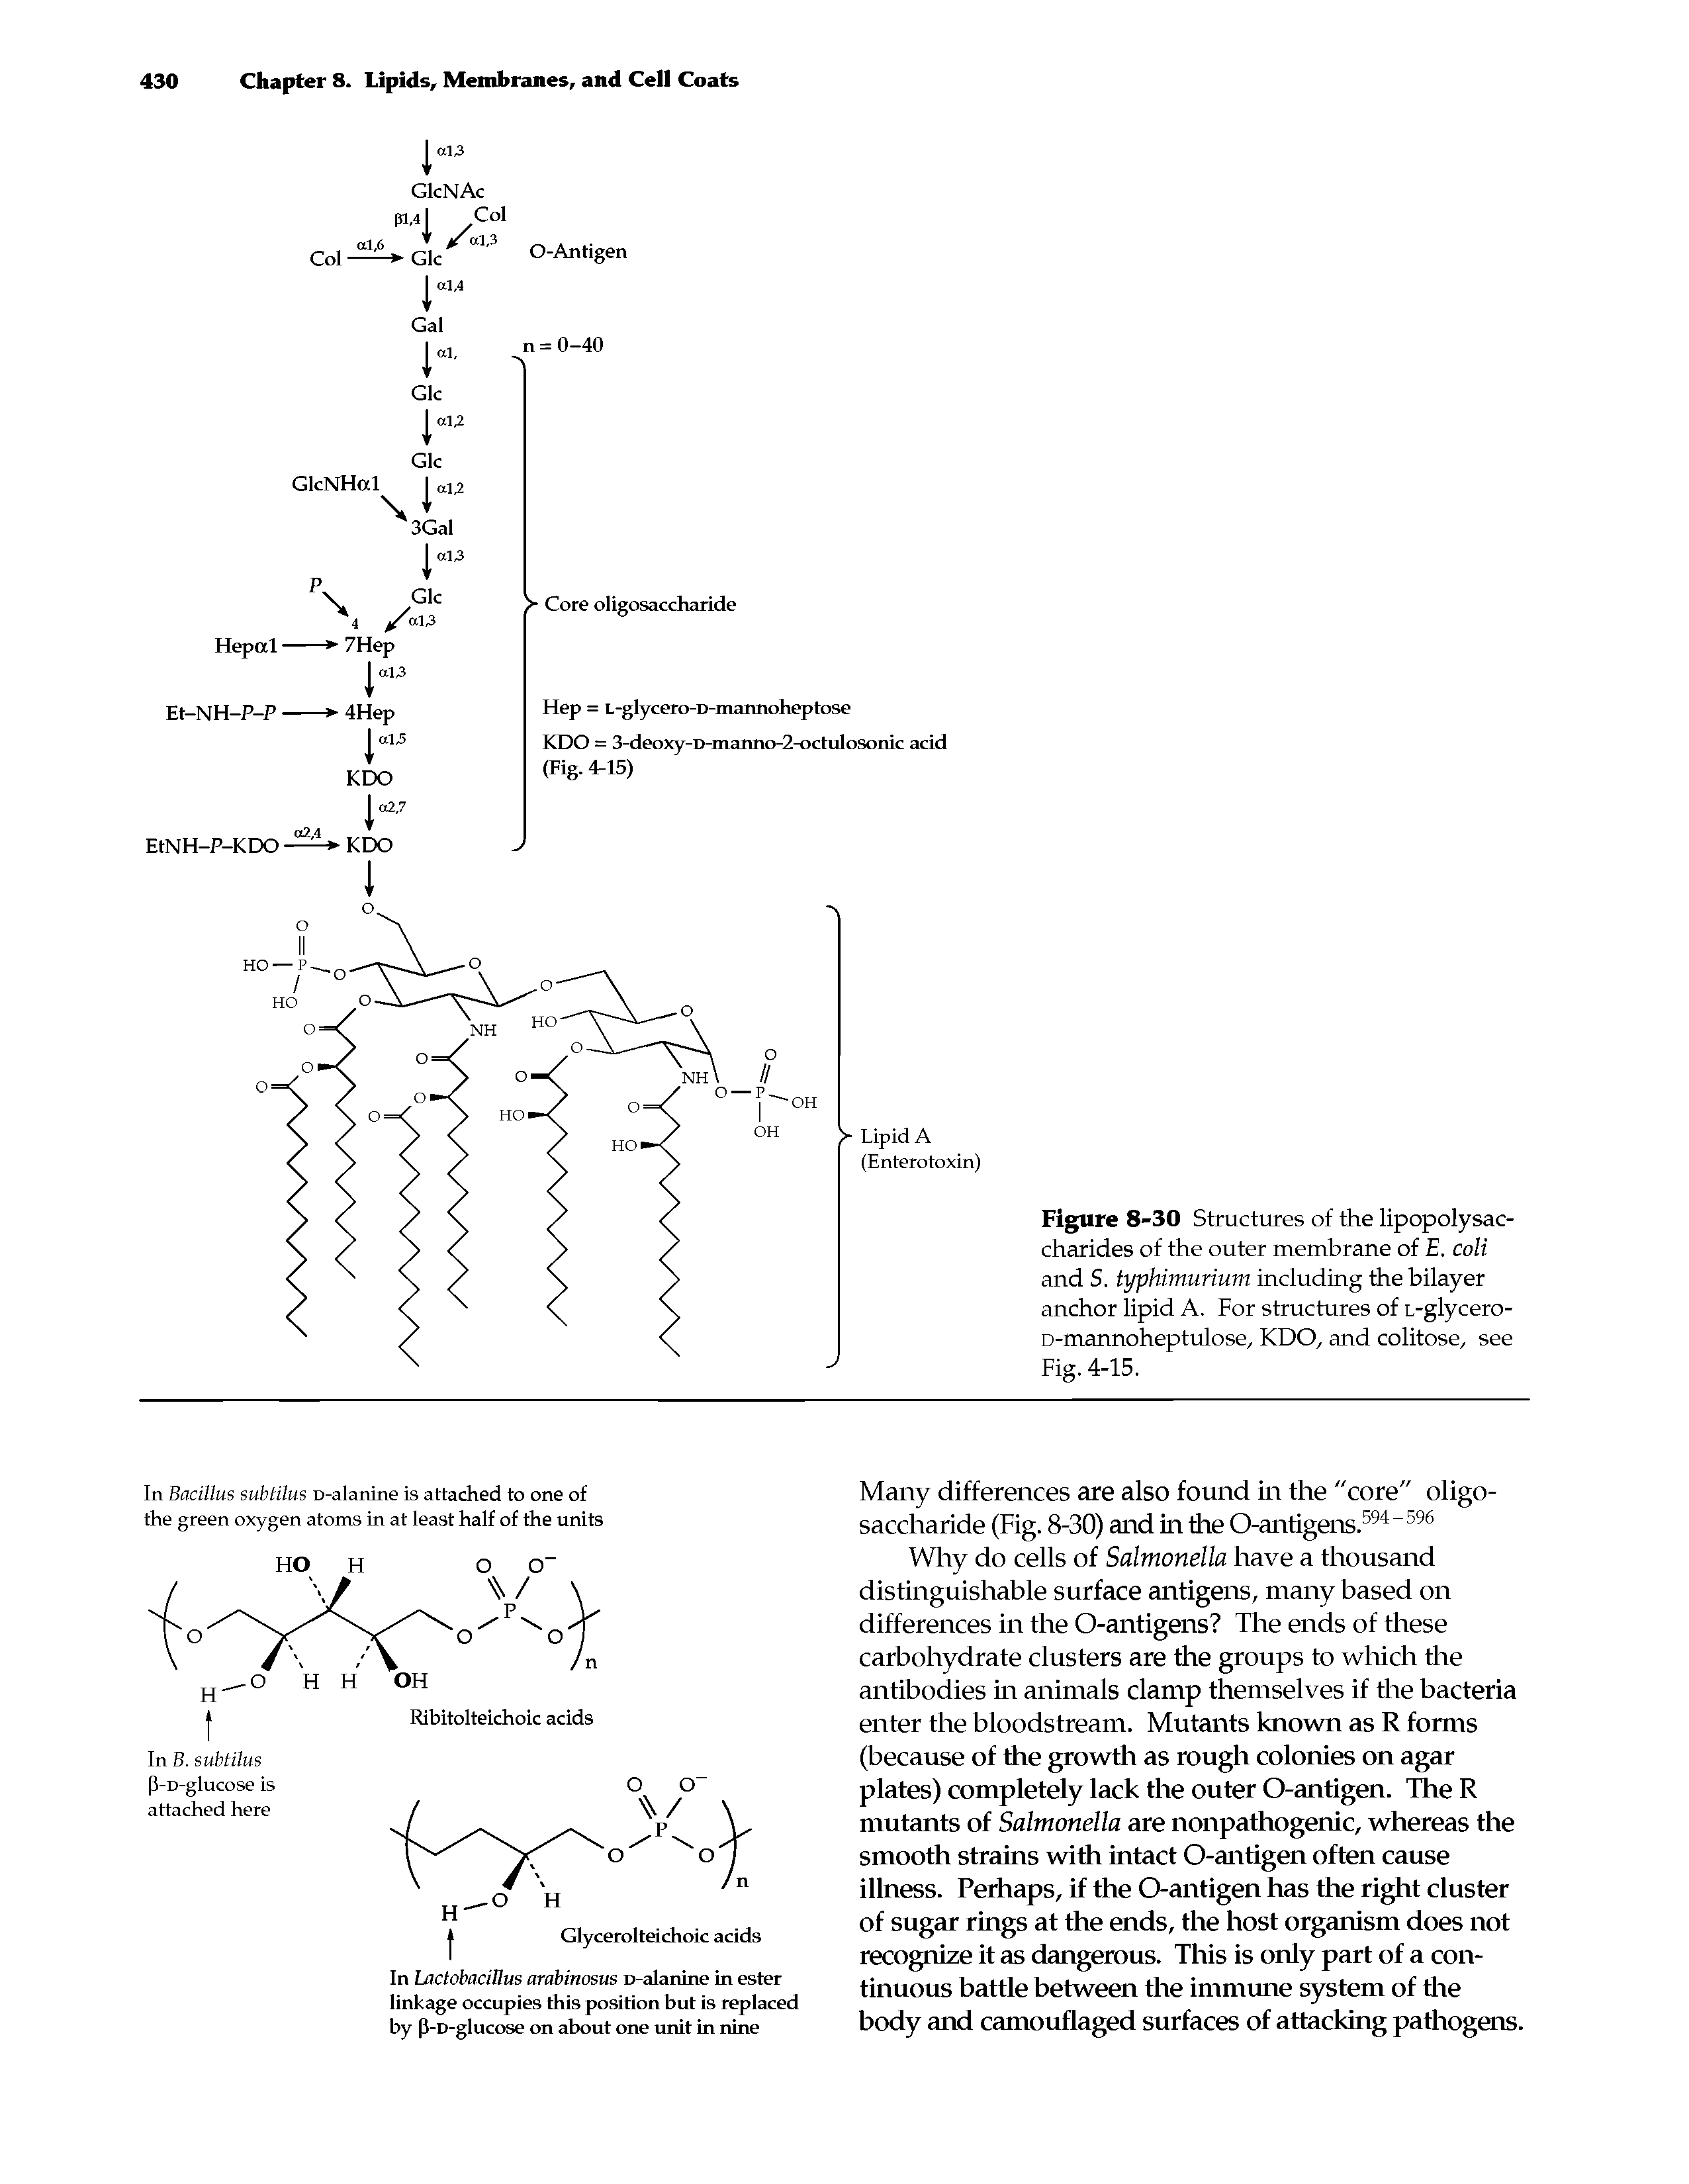 Figure 8-30 Structures of the lipopolysac-charides of the outer membrane of E. coli and S. typhimurium including the bilayer anchor lipid A. For structures of L-glycero-D-mannoheptulose, KDO, and colitose, see Fig. 4-15.